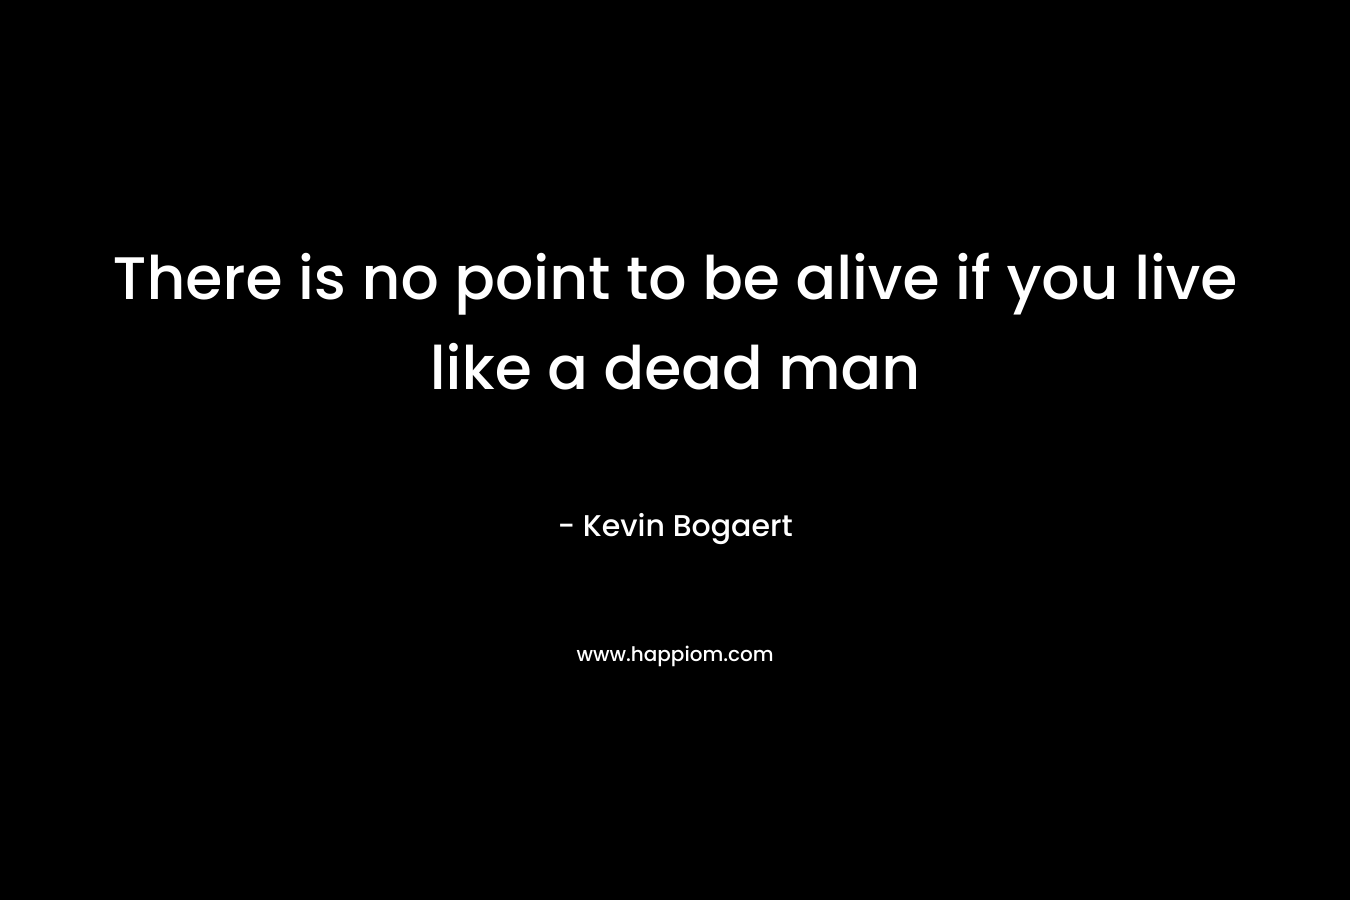 There is no point to be alive if you live like a dead man